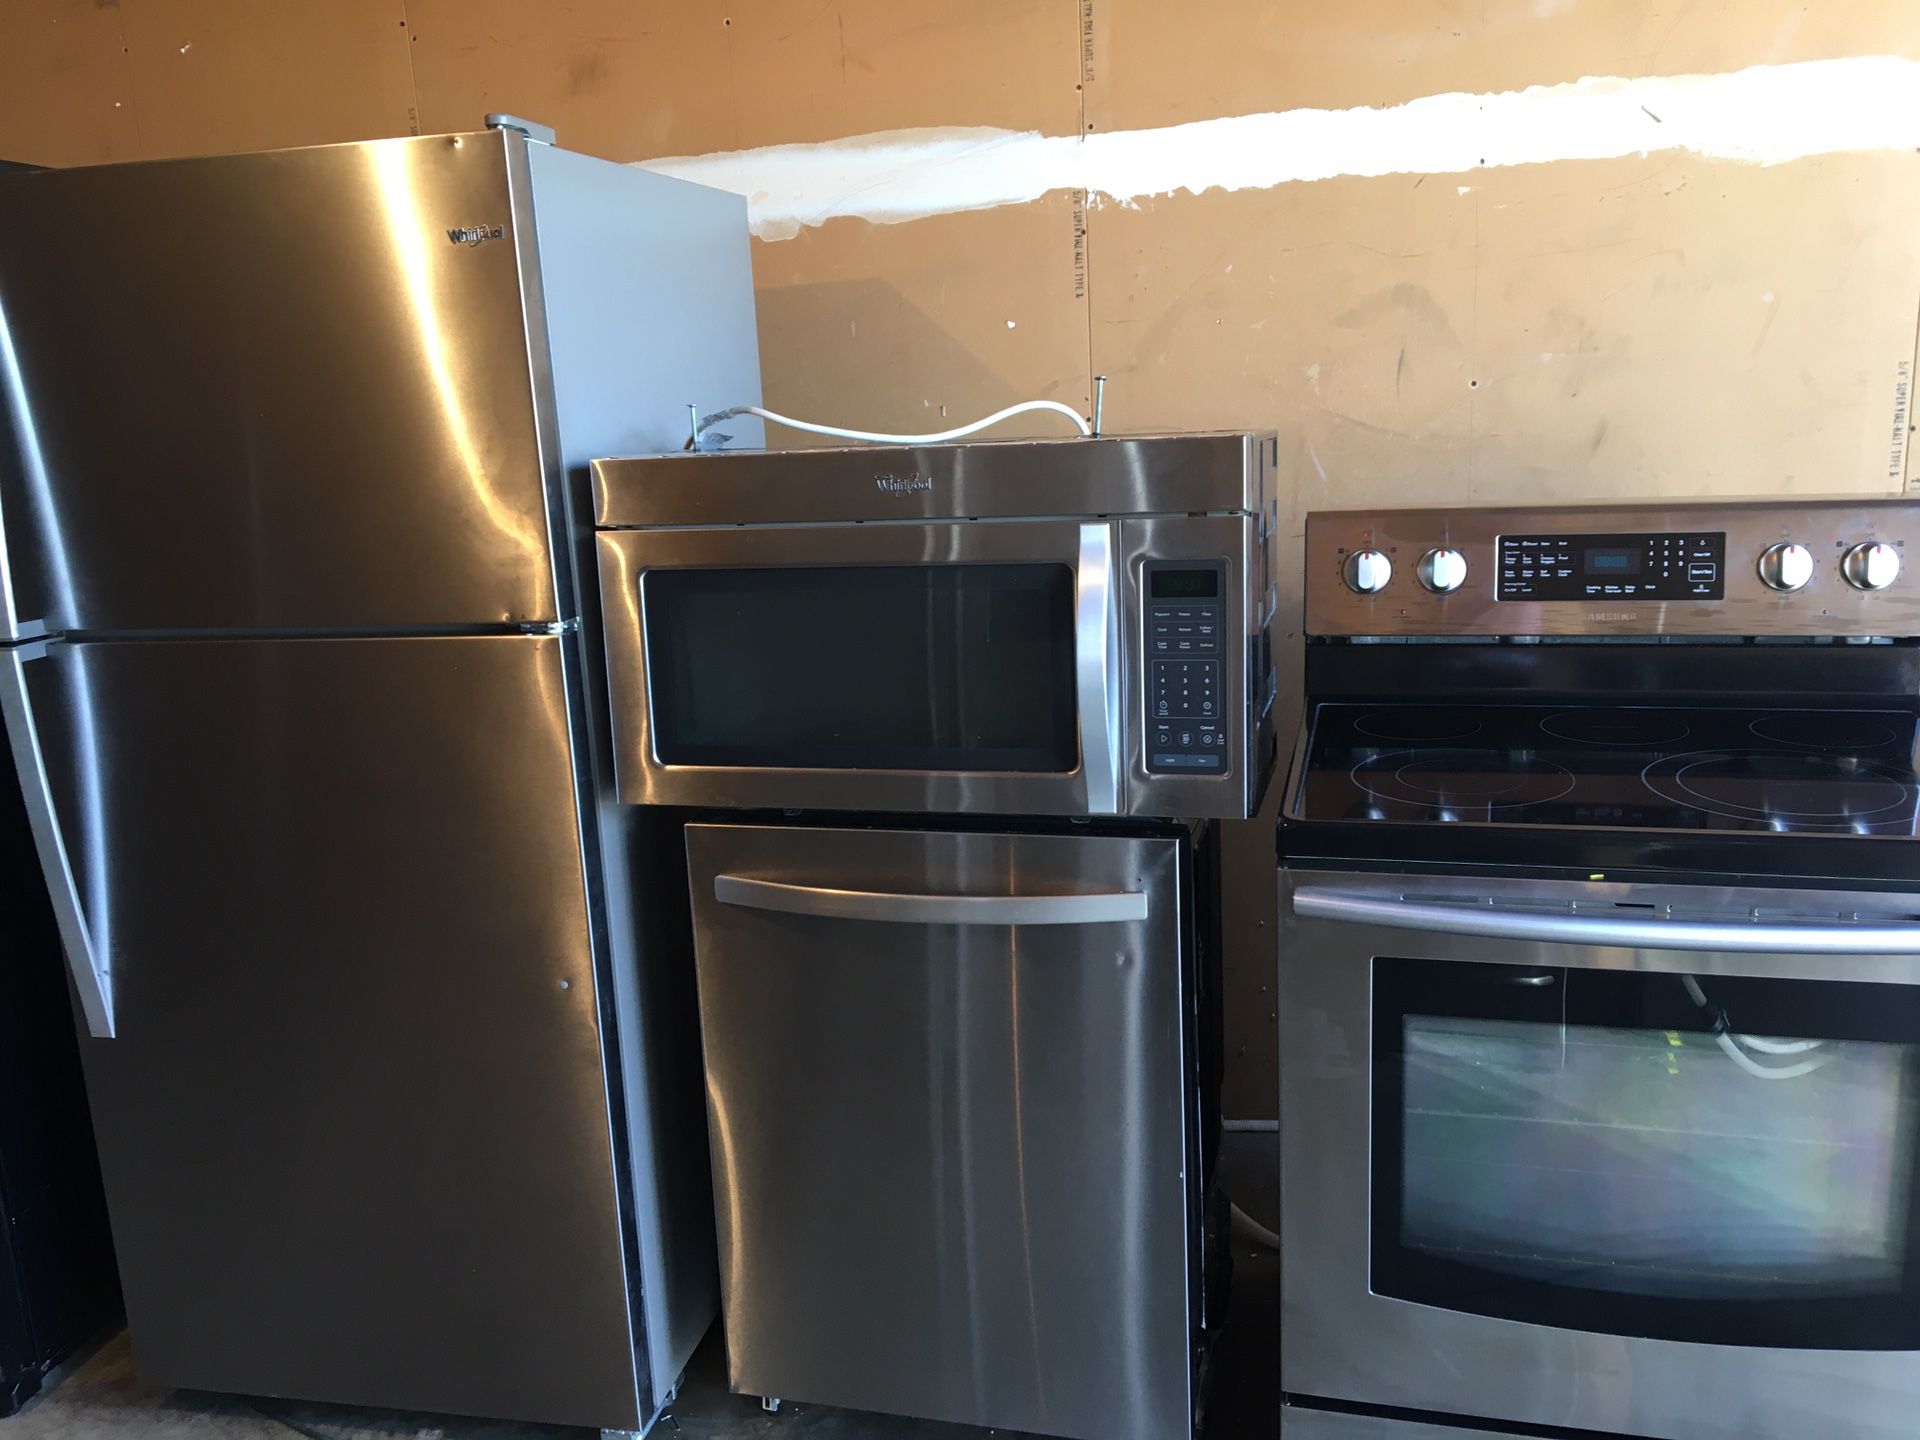 Like new stainless steel fridge stove microwave dishwasher excellent working condition cheap price